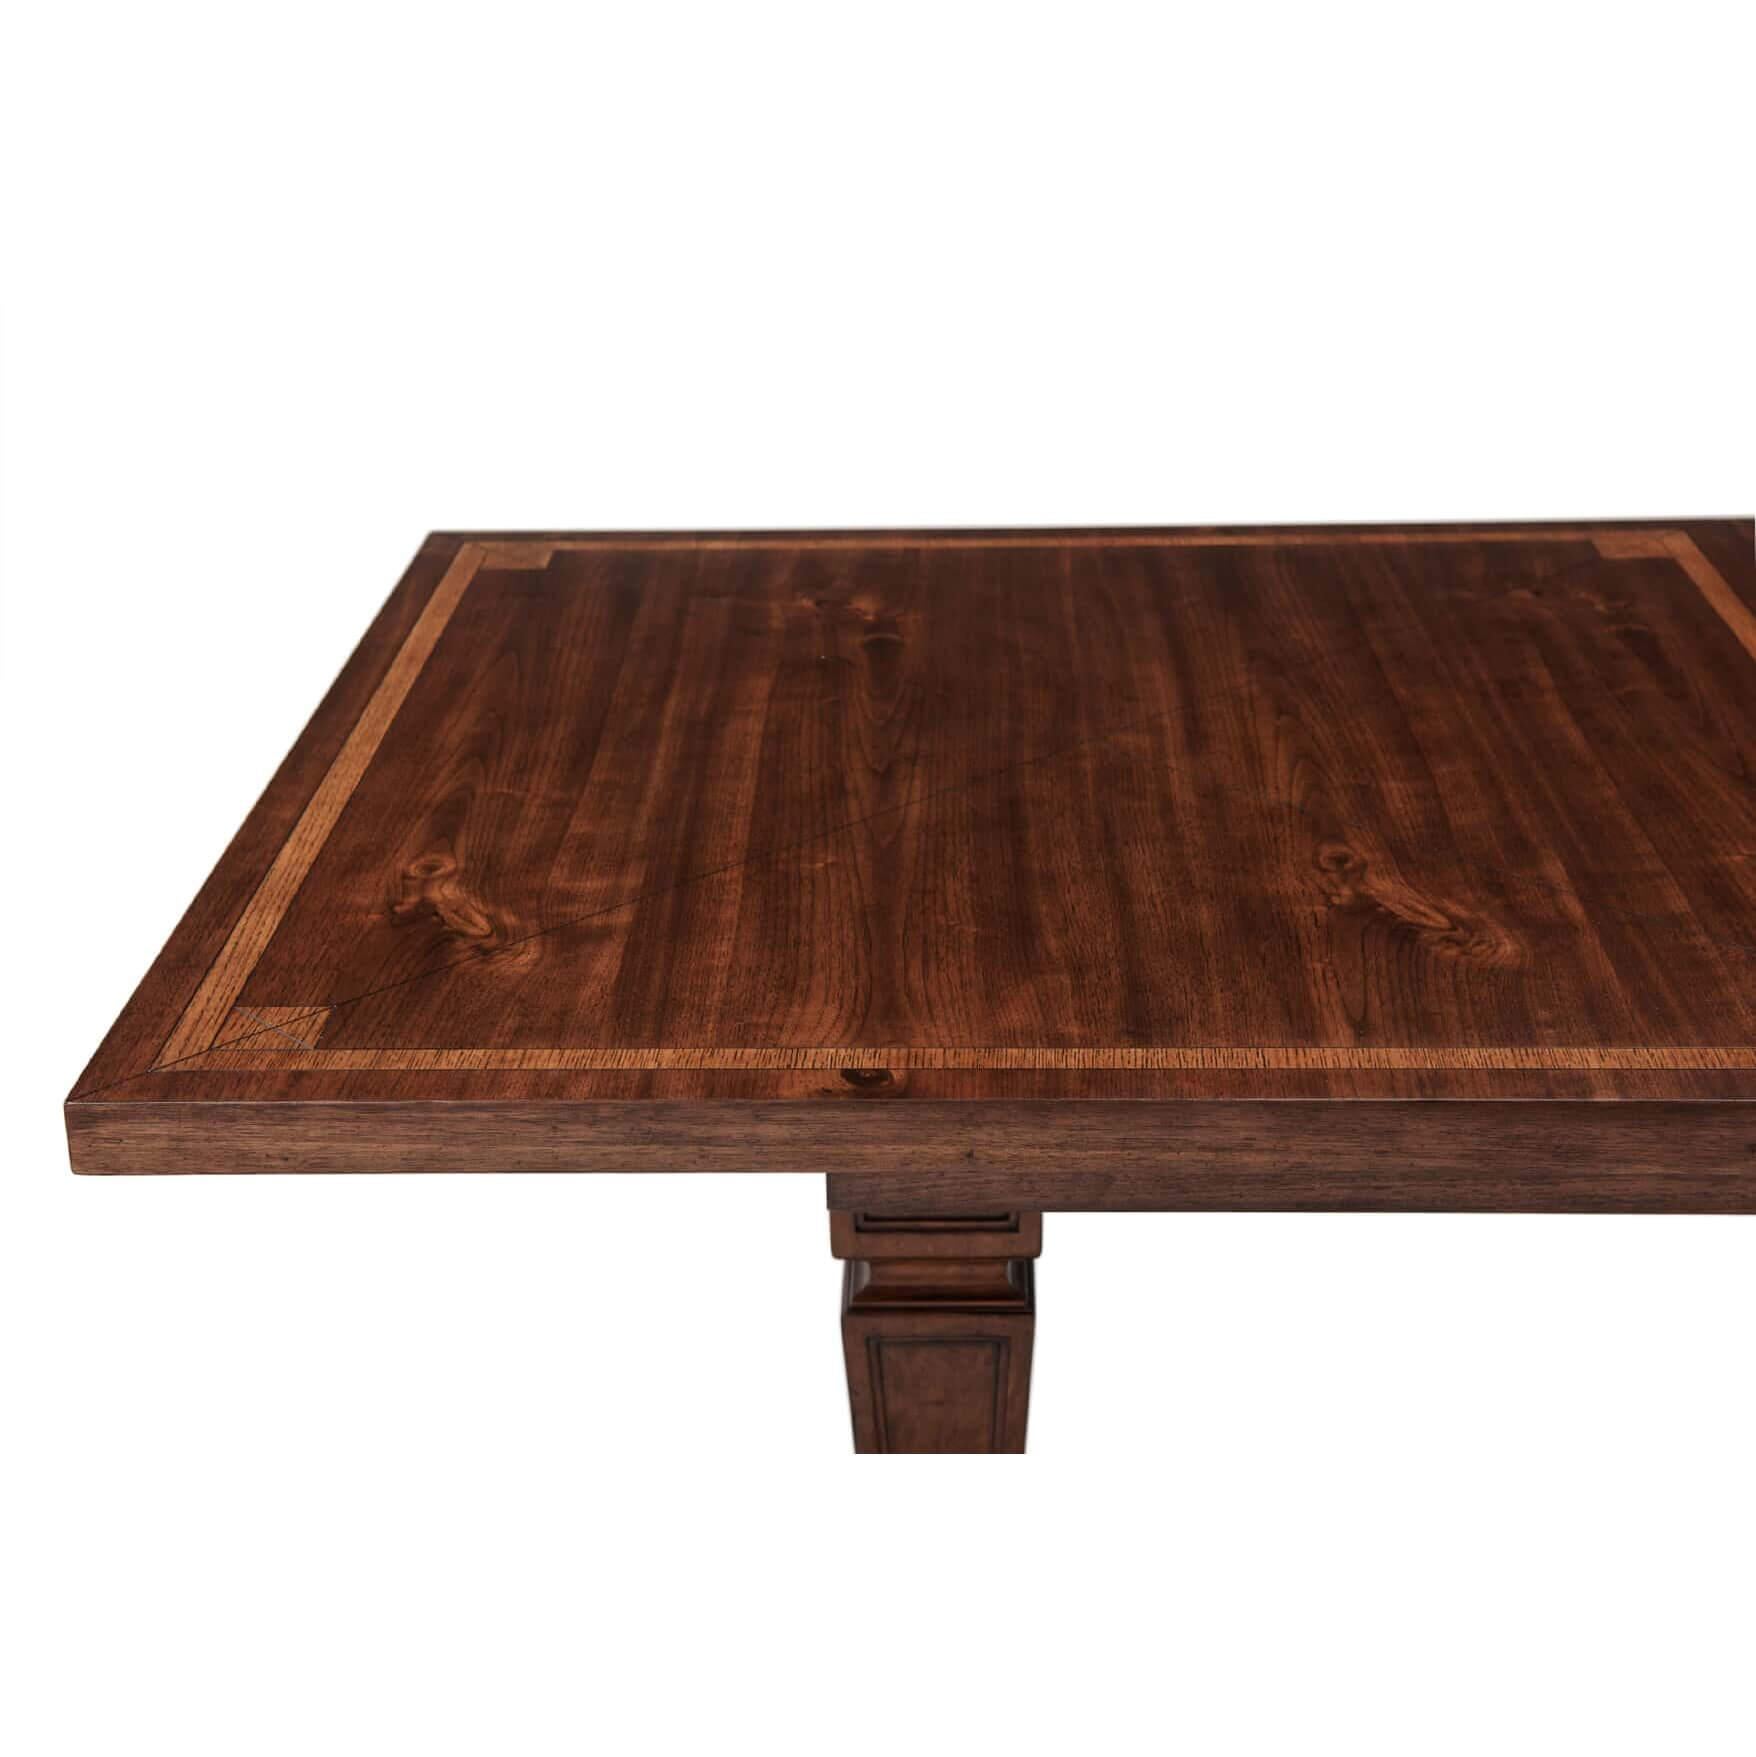 Contemporary Provincial Neoclassic Extension Dining Table